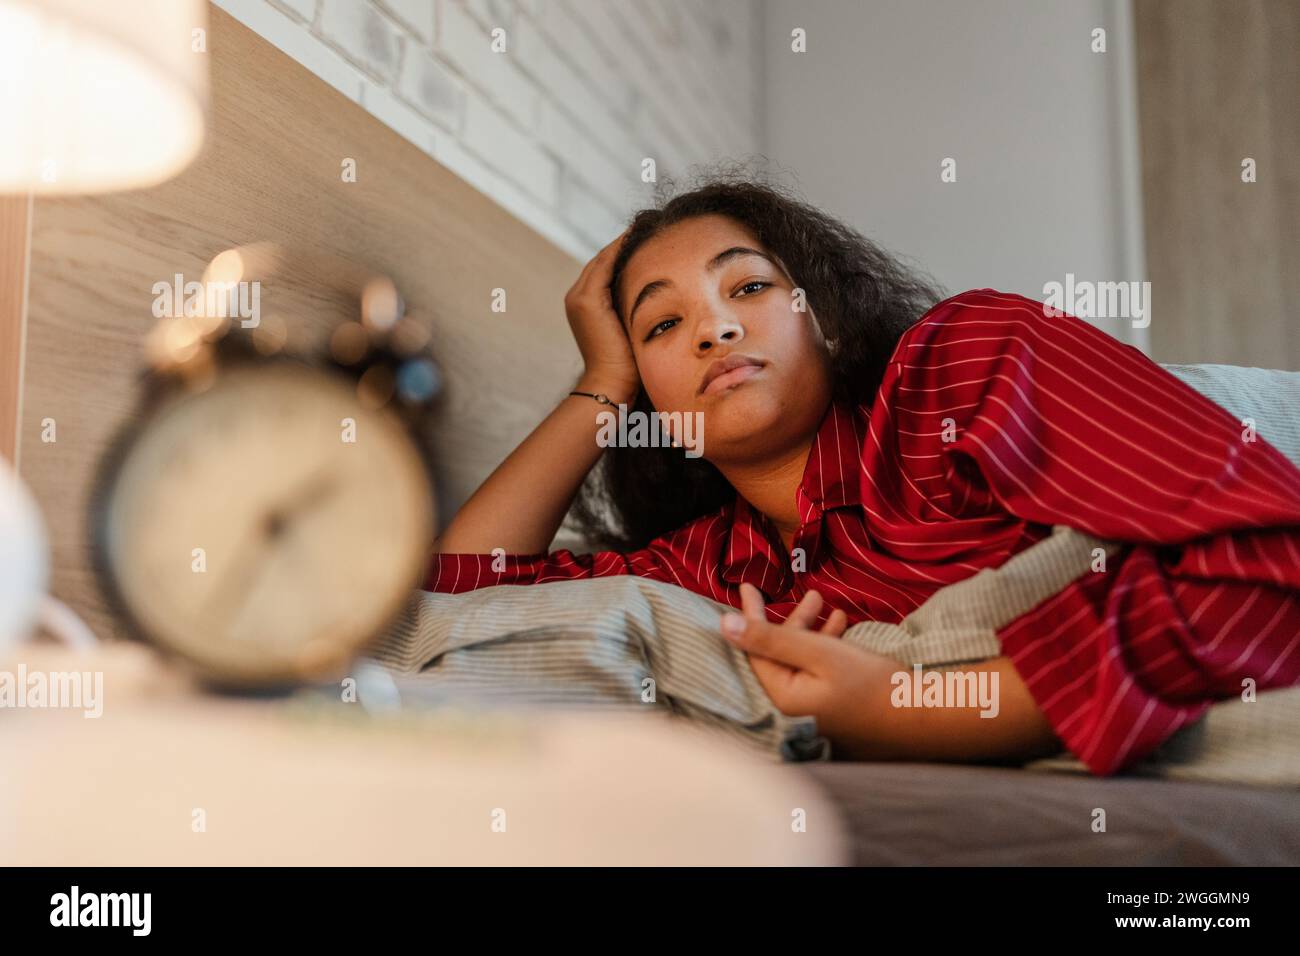 Woman can't fall asleep, insomnia a sleep problems. Concept of sleep routine and techniques for better sleep. Stock Photo